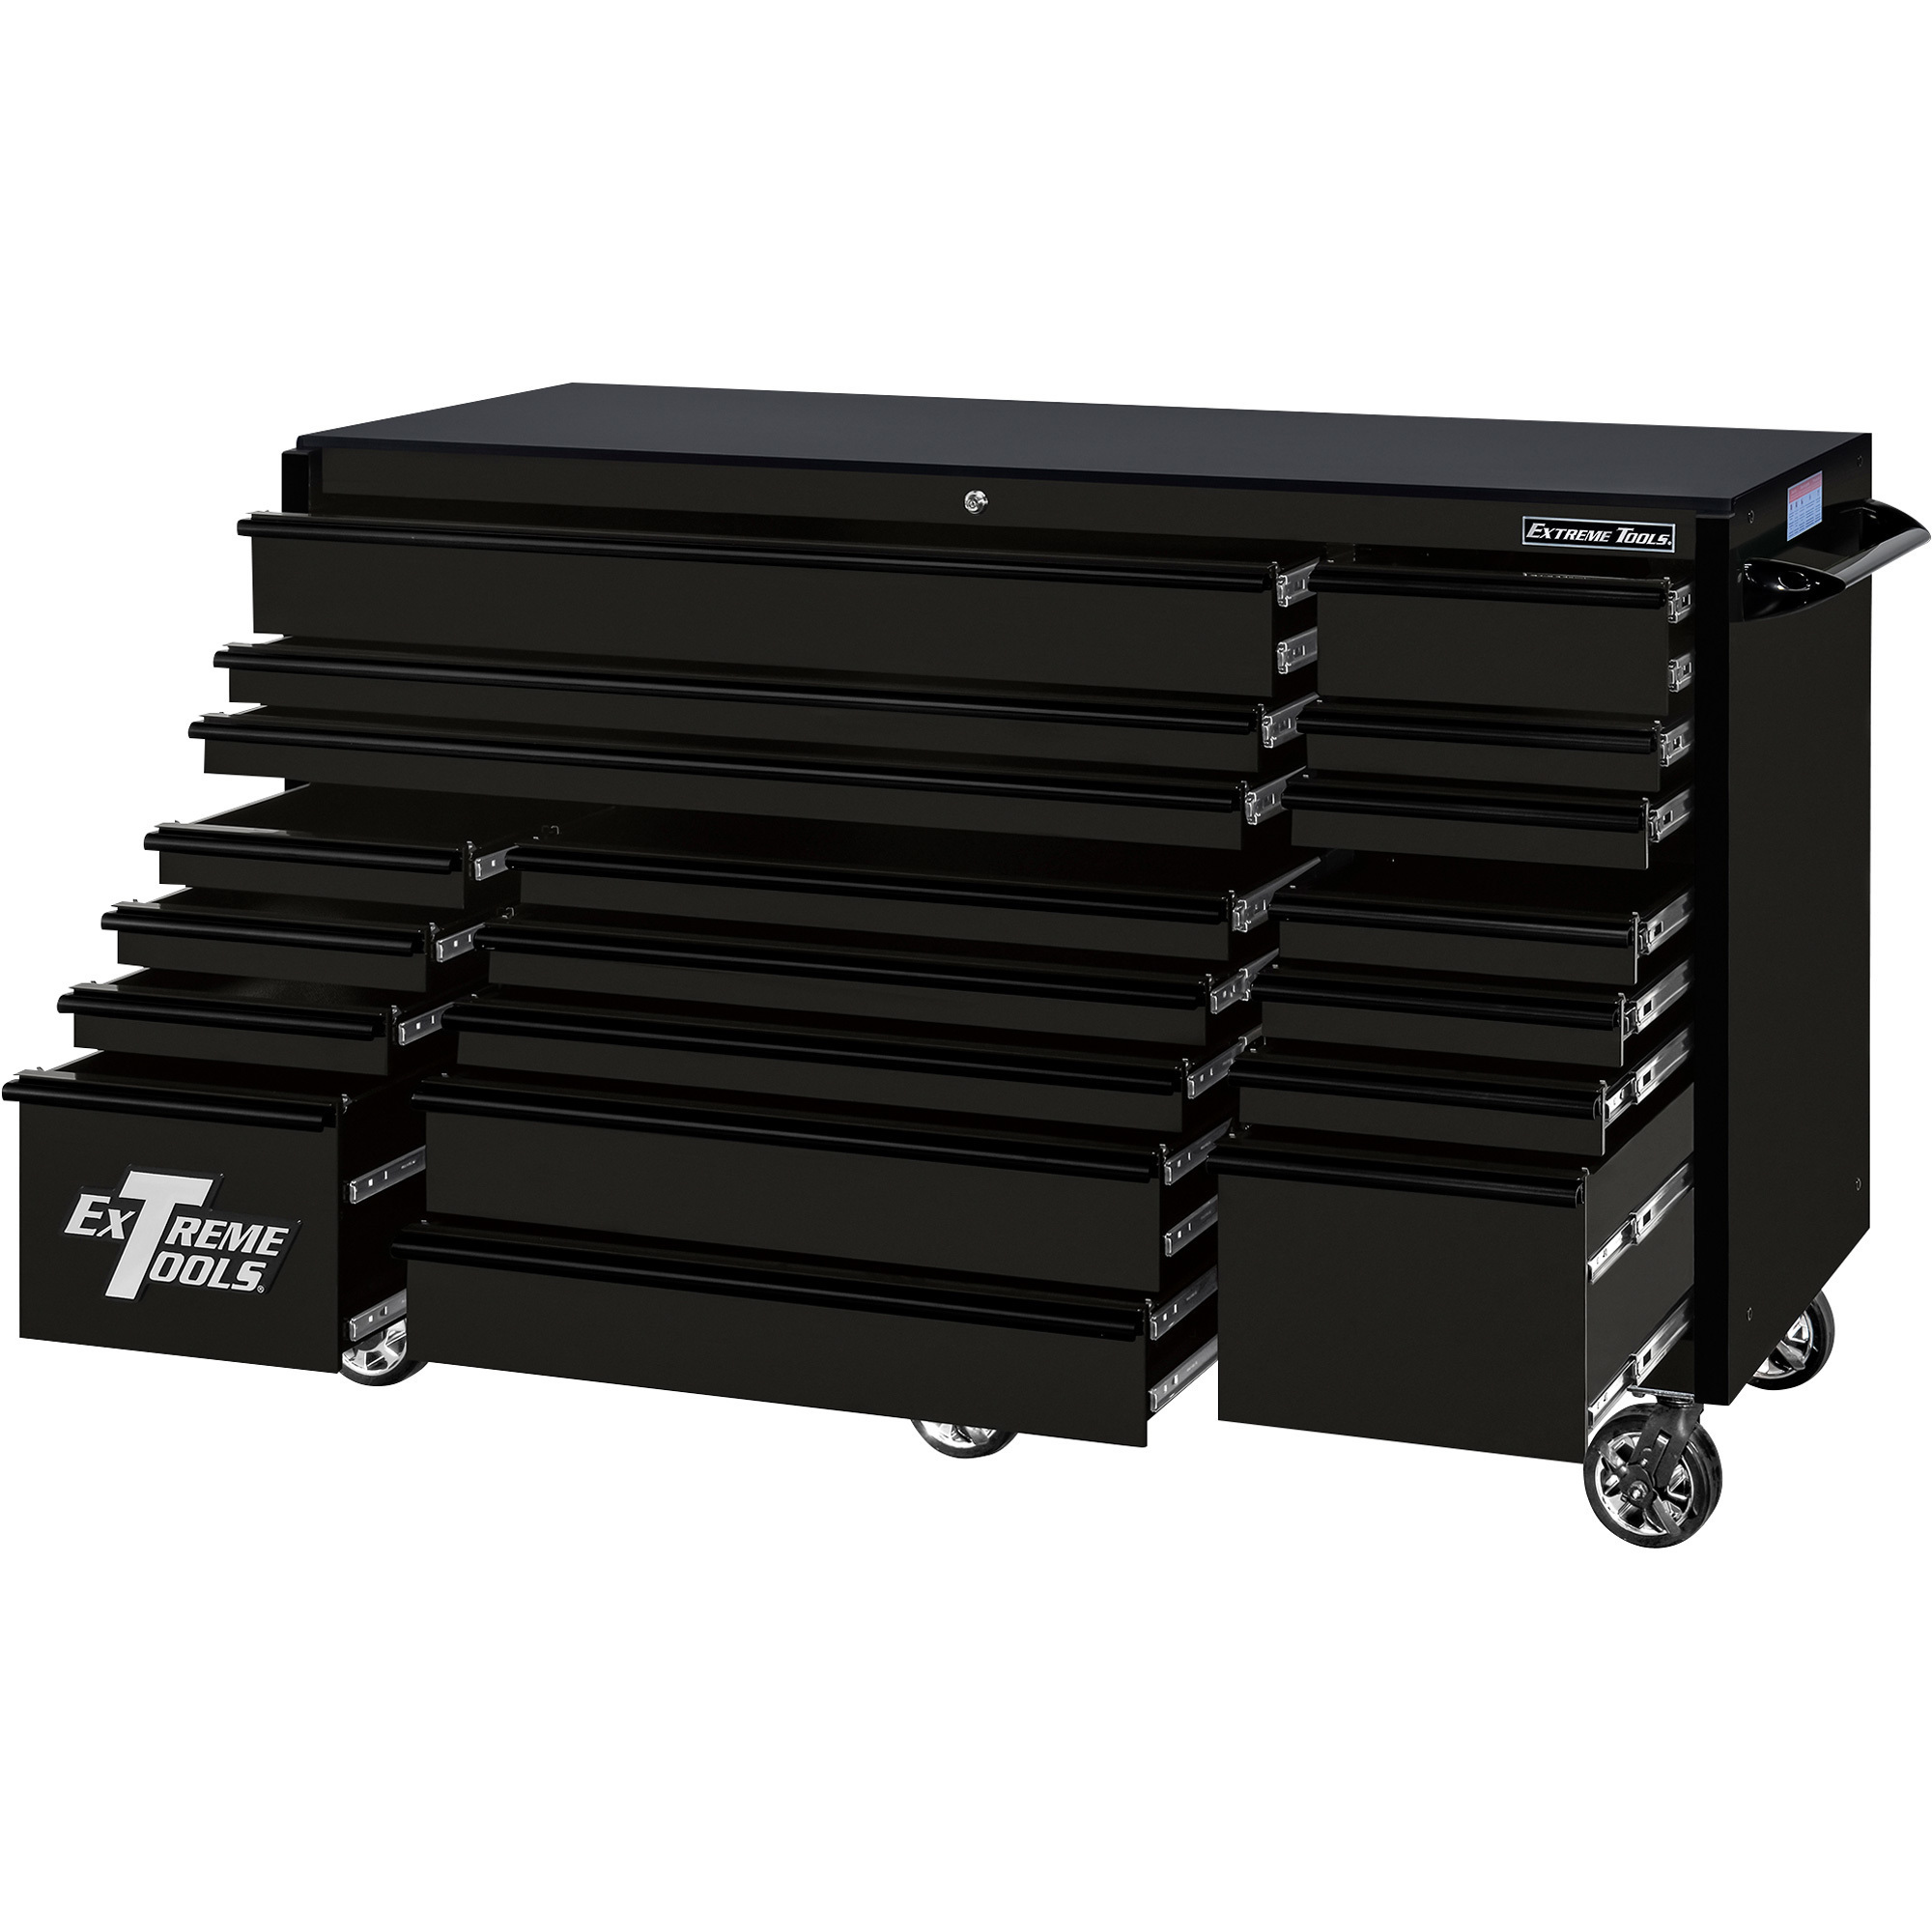 Extreme Tools RX Series 72Inch L x 30Inch W 19 Drawer Tool Roller Cabinet — Matte Black with Black Drawer Pulls, 72Inch W x 30Inch D x 47Inch H, Model -  RX723019RCMBBK-250